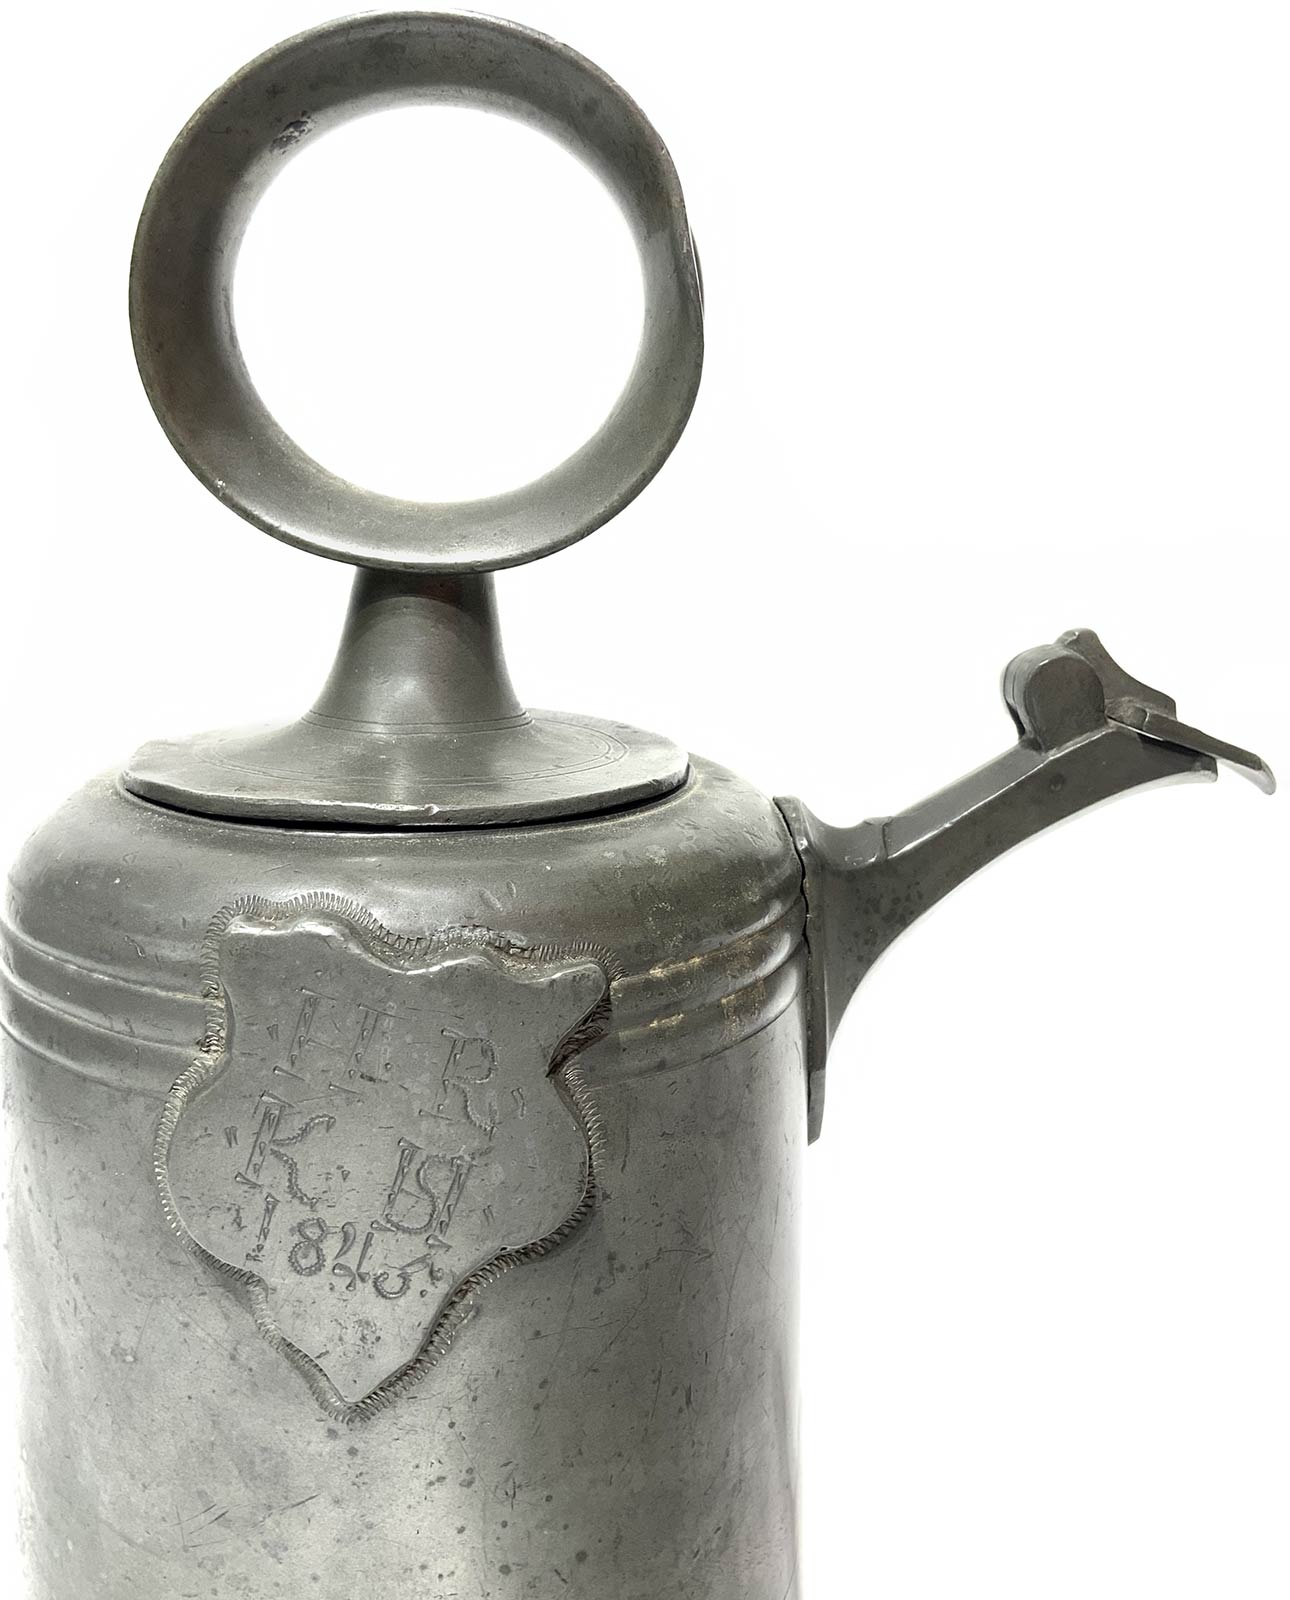 Pewter spout, dated 1846. H 27x13 cm - Image 3 of 4